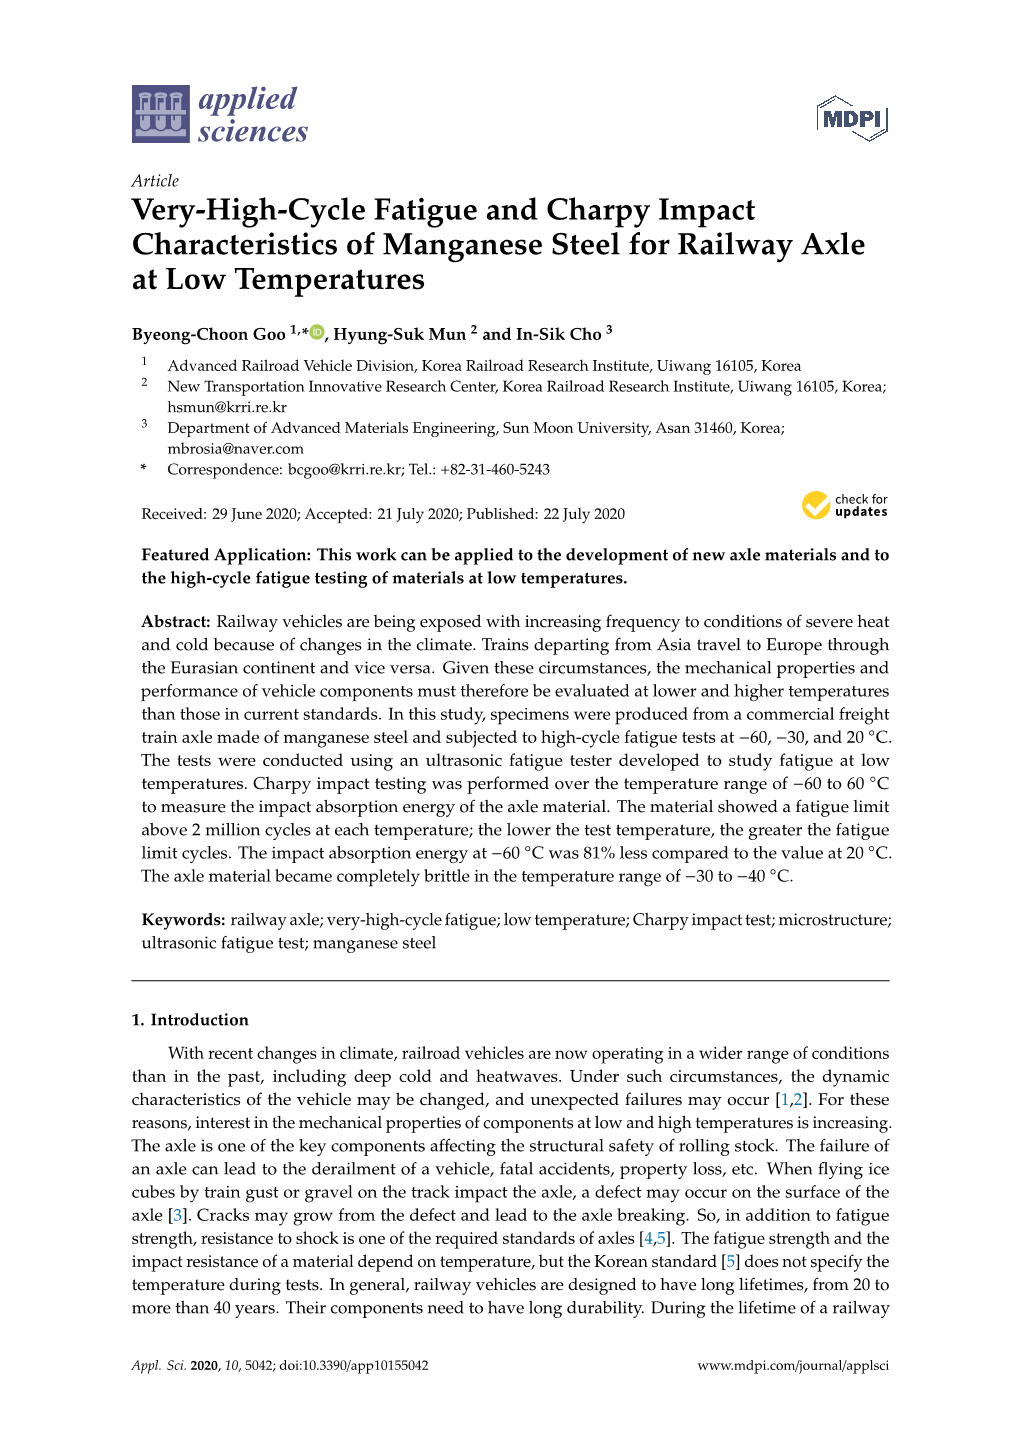 Very-High-Cycle Fatigue and Charpy Impact Characteristics of Manganese Steel for Railway Axle at Low Temperatures